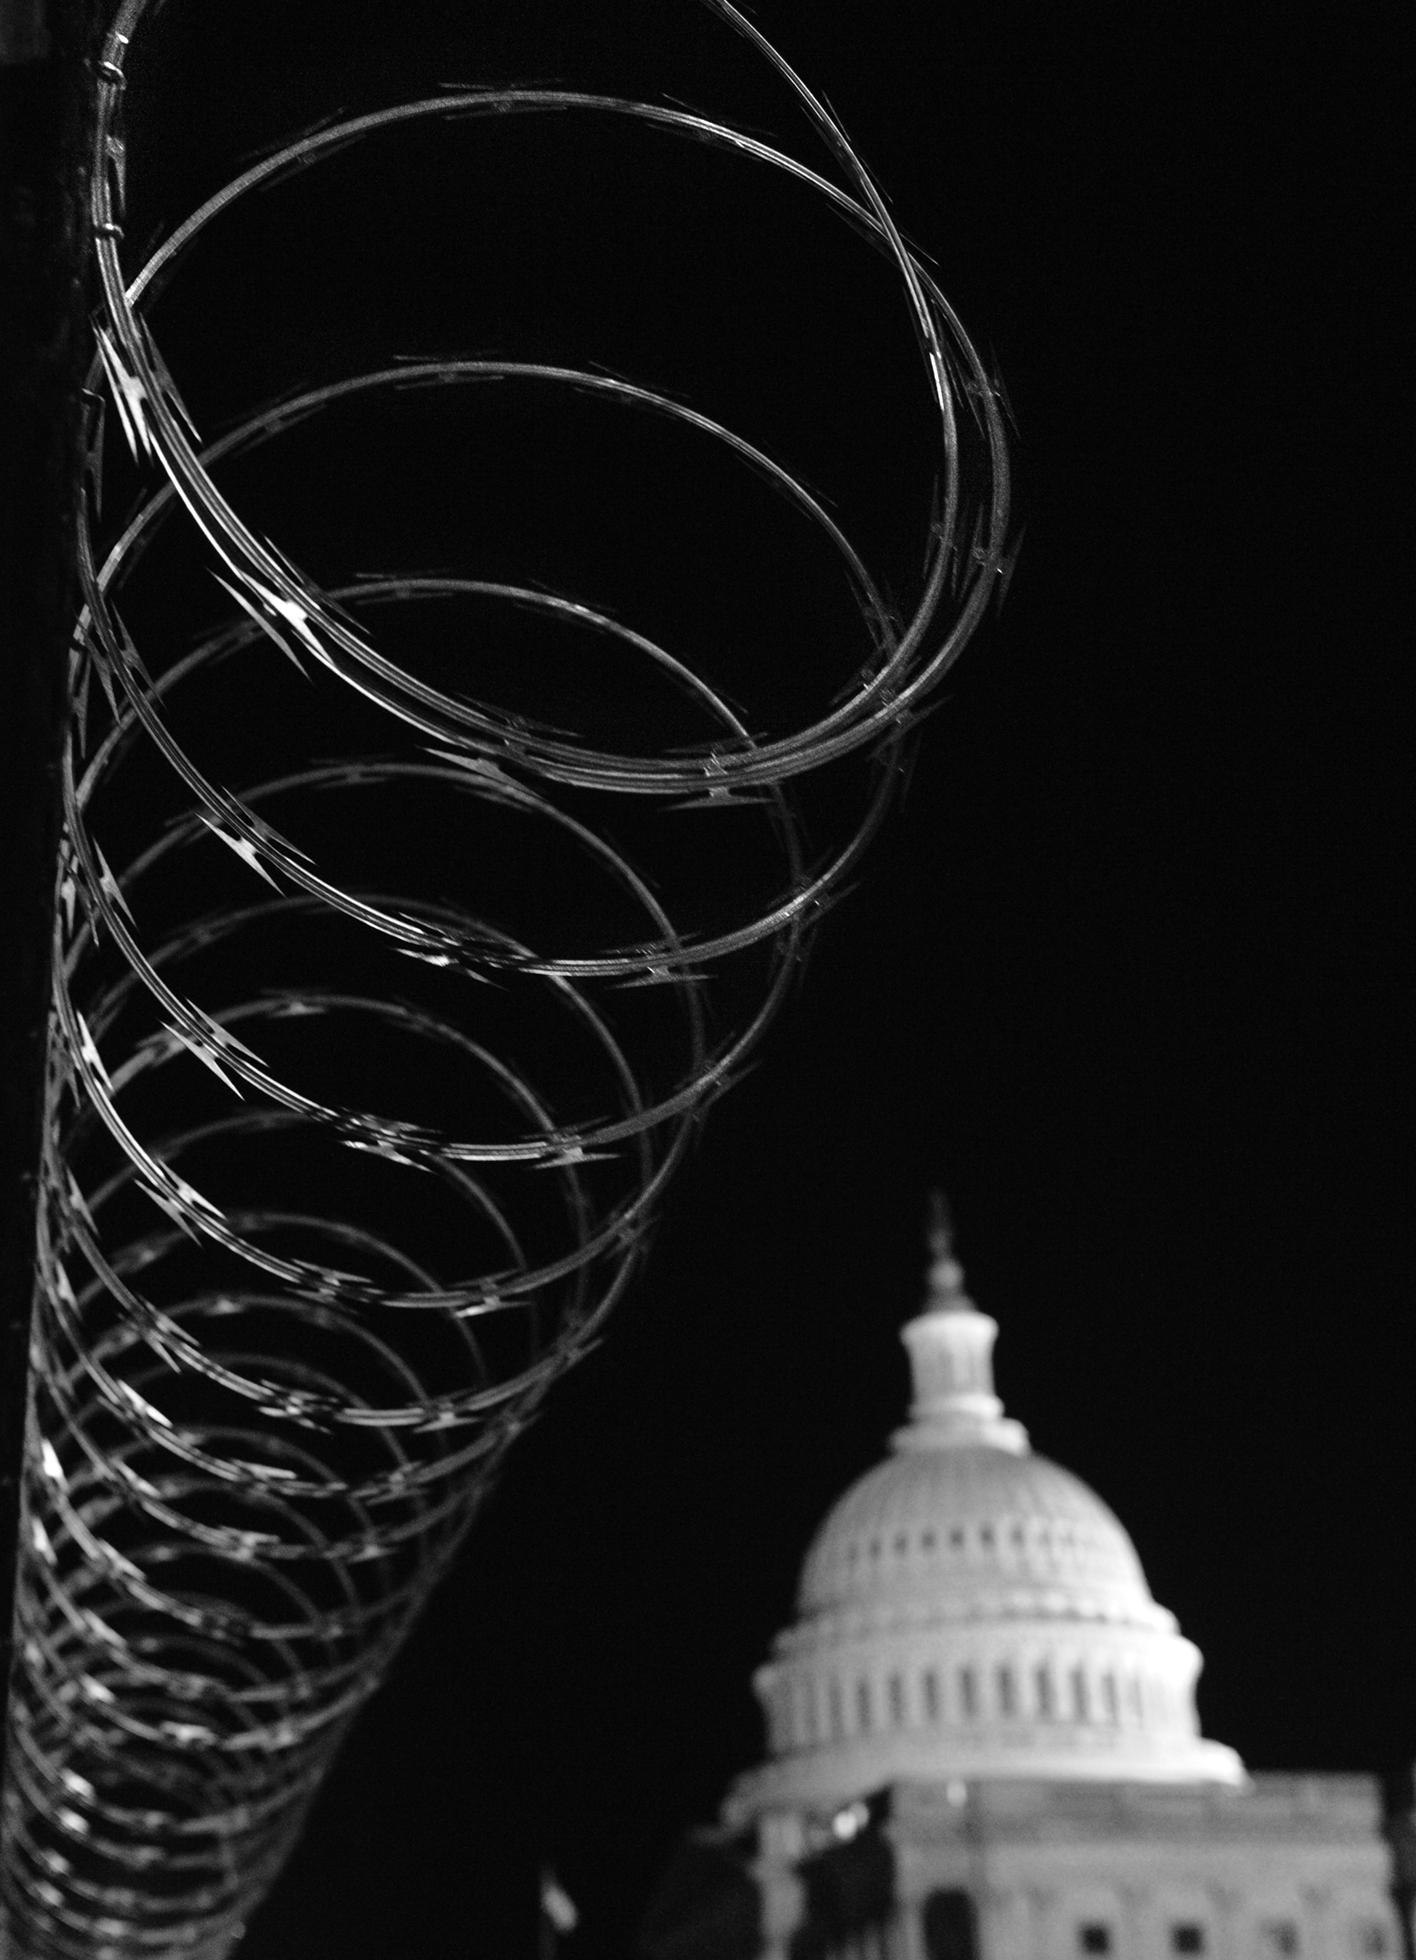 A close-up of razor wire with the Capitol’s dome off in the distance and slightly blurred.